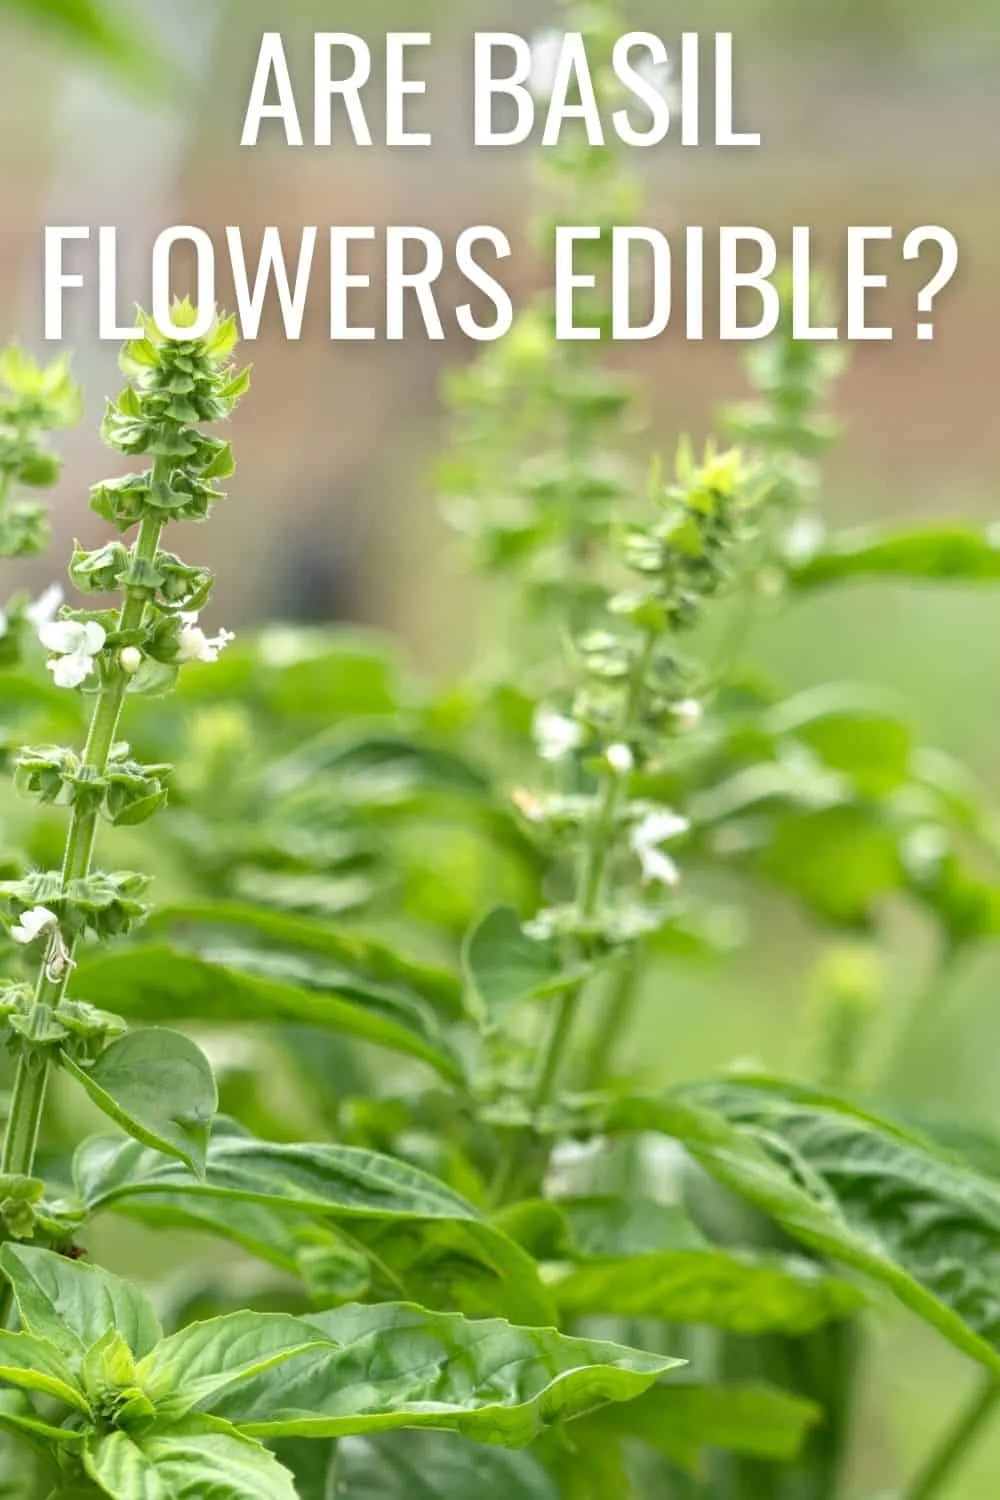 Are basil flowers edible? 